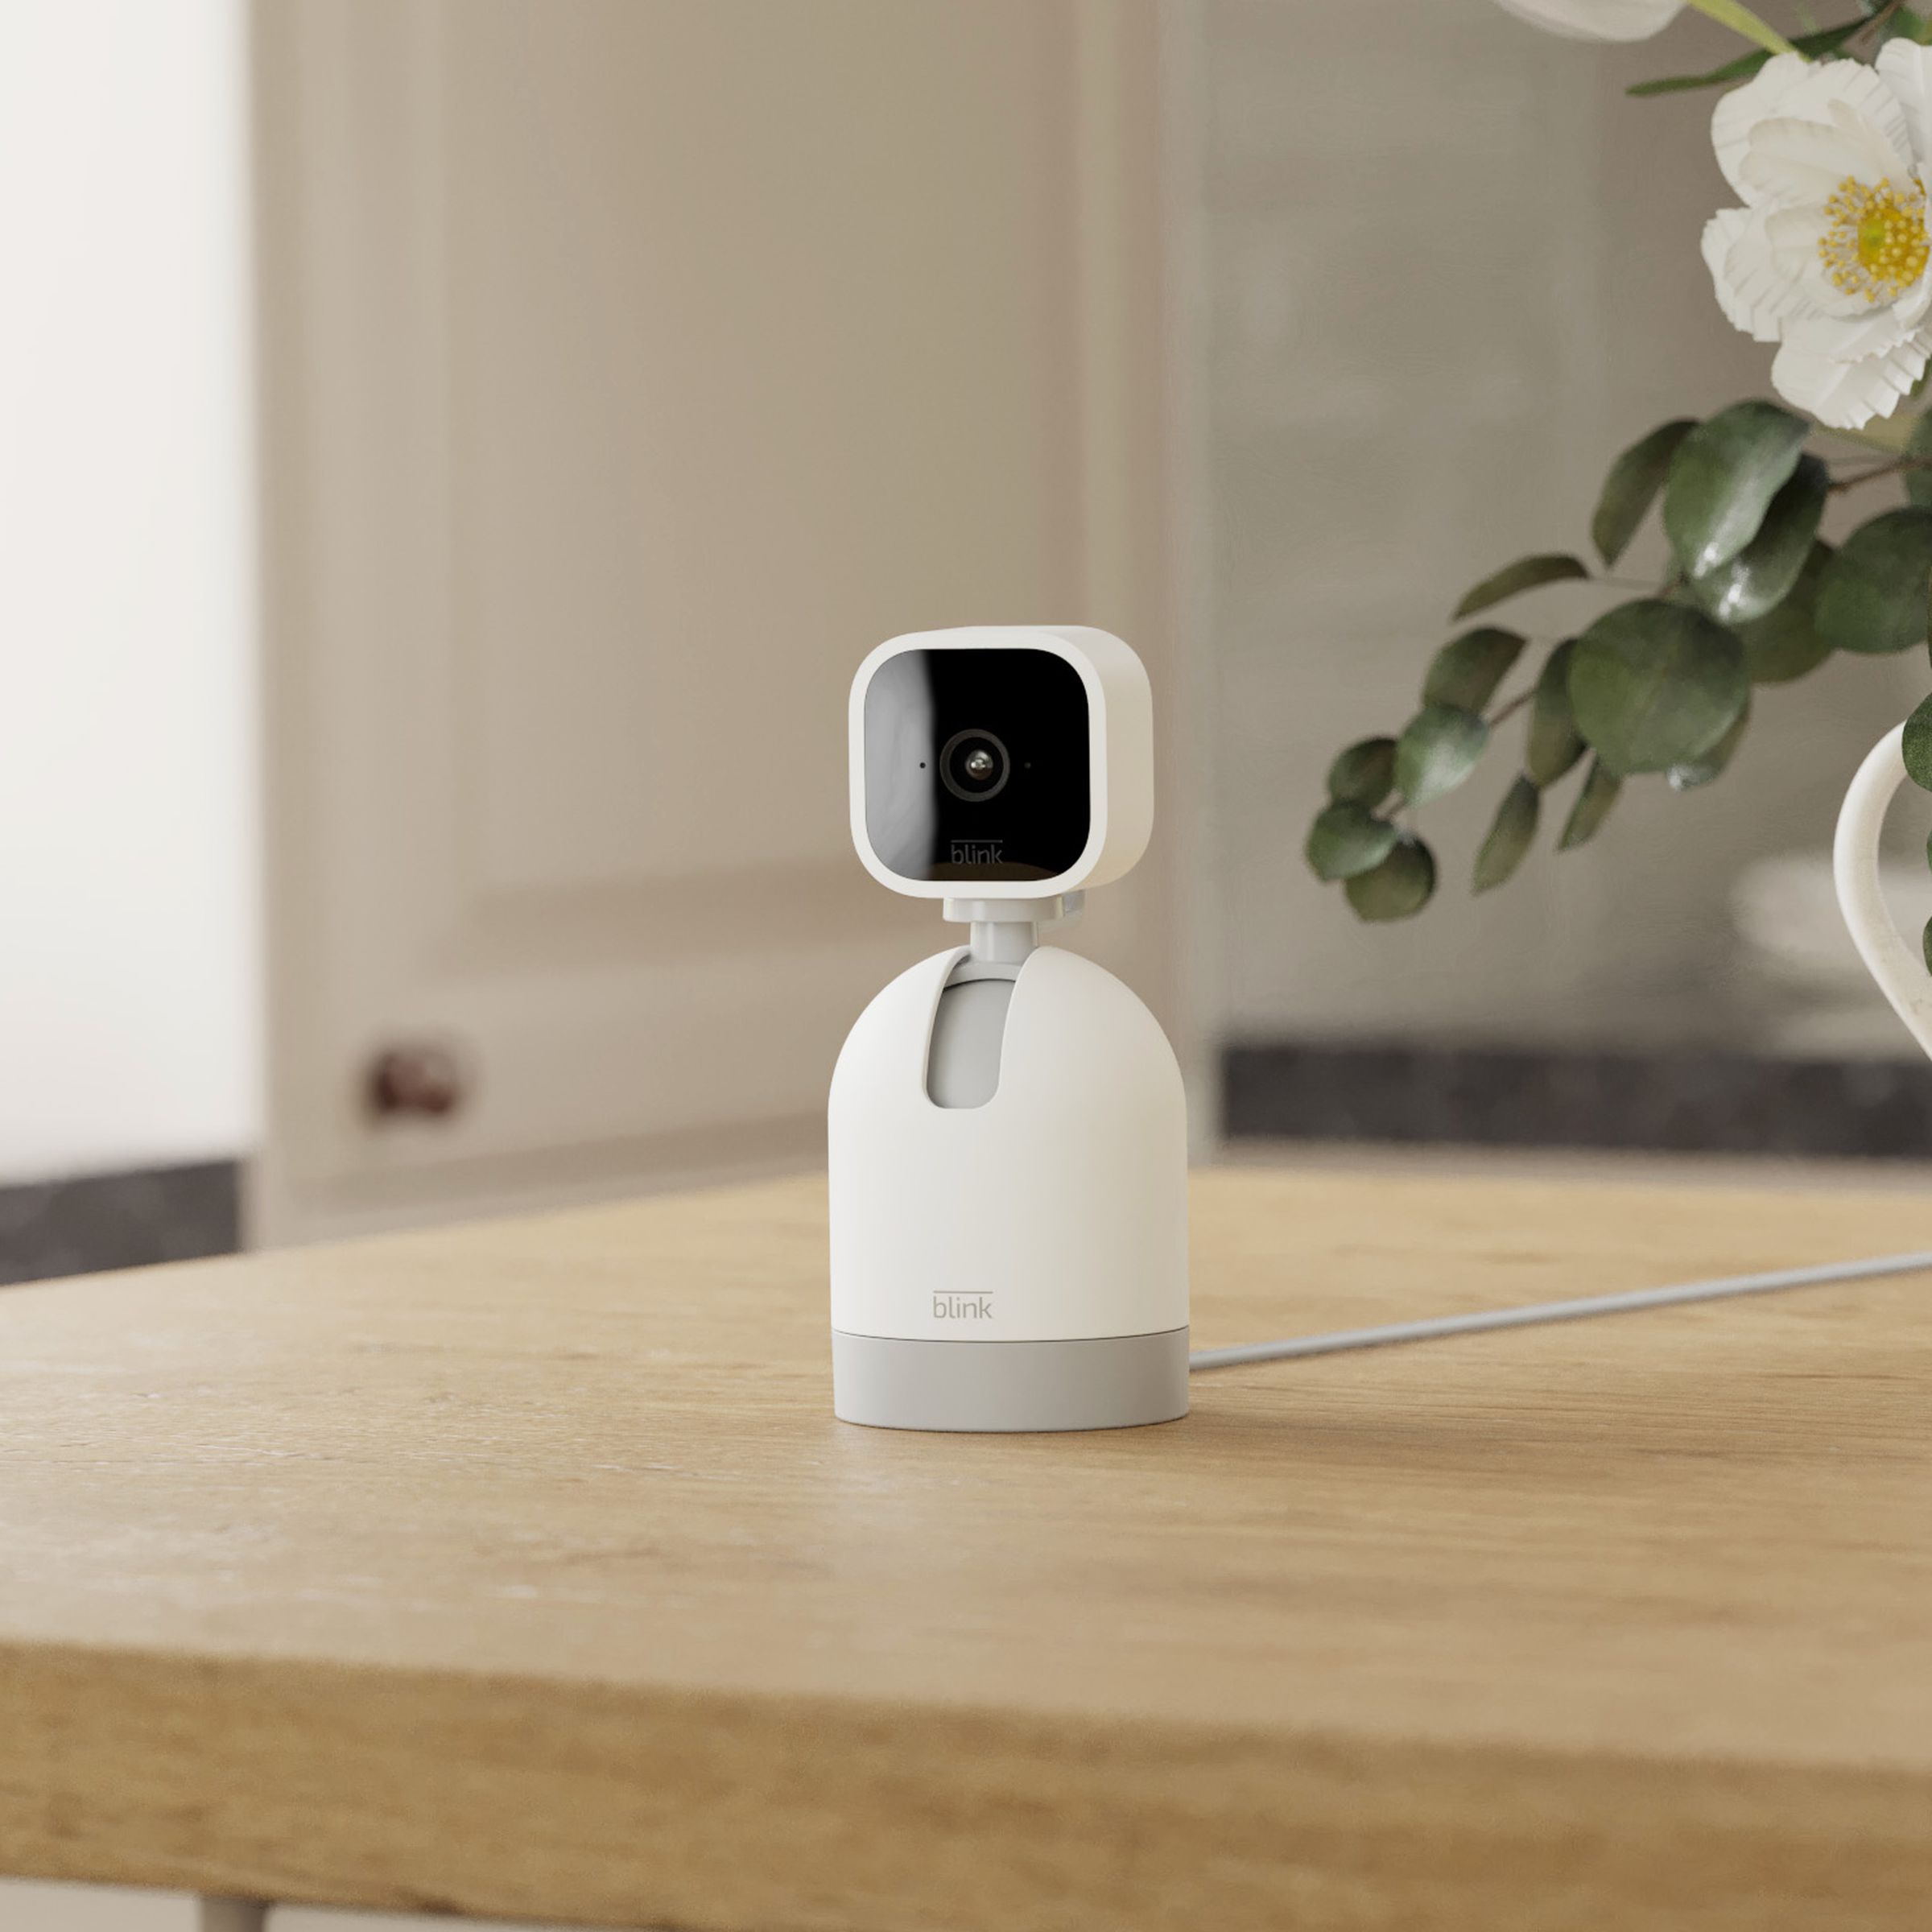 The scene is a wooden kitchen counter with a flower pot offset to the right, and in the center is the Blink Mini cam, which is a blocky black and white device. It’s mounted on a white bullet-shaped body that makes it look like a Pixar-style robot device. There’s a cable running out the back.